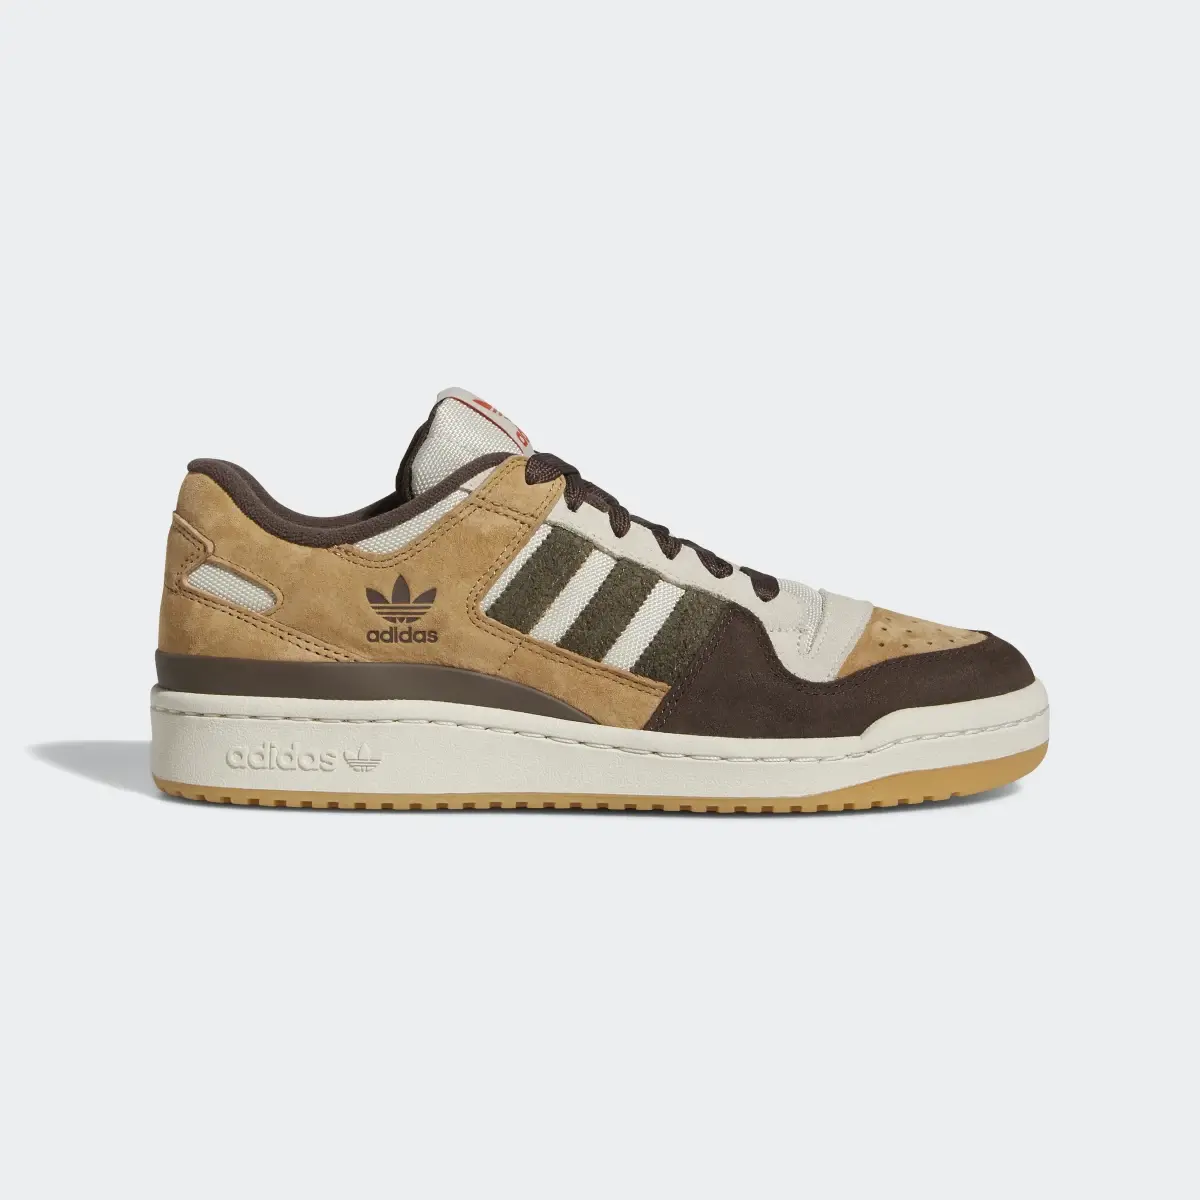 Adidas Forum 84 Low Shoes. 2